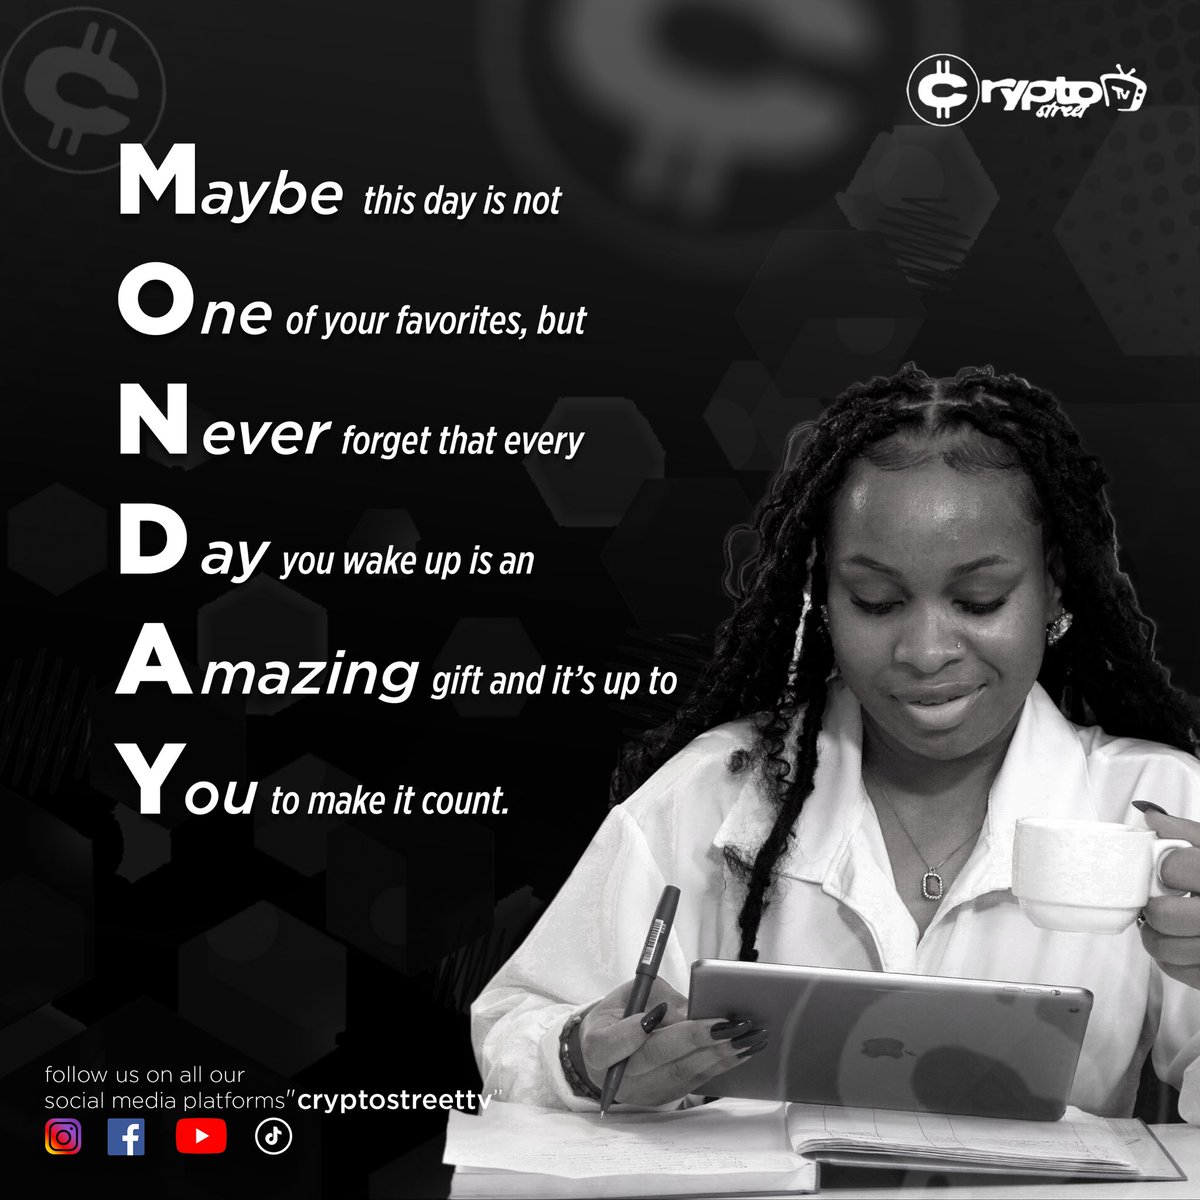 Your Monday morning thoughts set the tone for your whole week. See yourself getting stronger, and living a fulfilling, happier and healthier life.
.
.
.
.
.
#monday #motivation #newweek #cryptoweek #bitcoinhalving2024